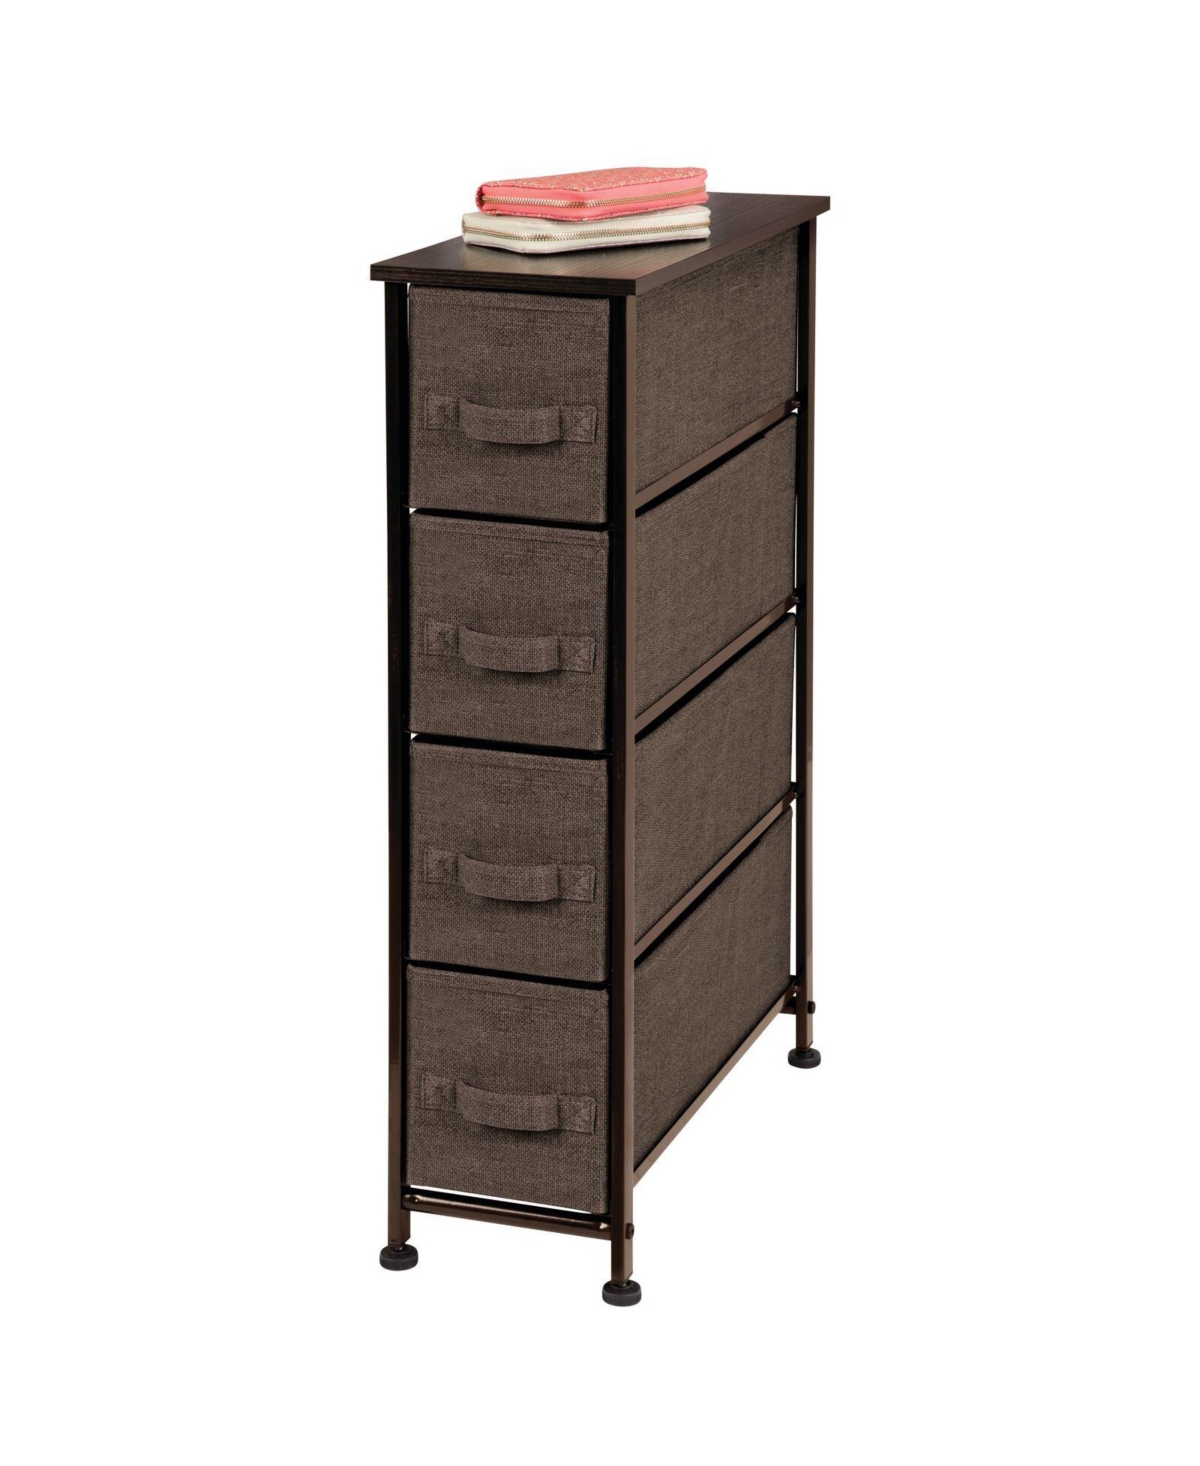 Narrow Dresser Storage Tower Stand with 4 Removable Fabric Drawers - Espresso